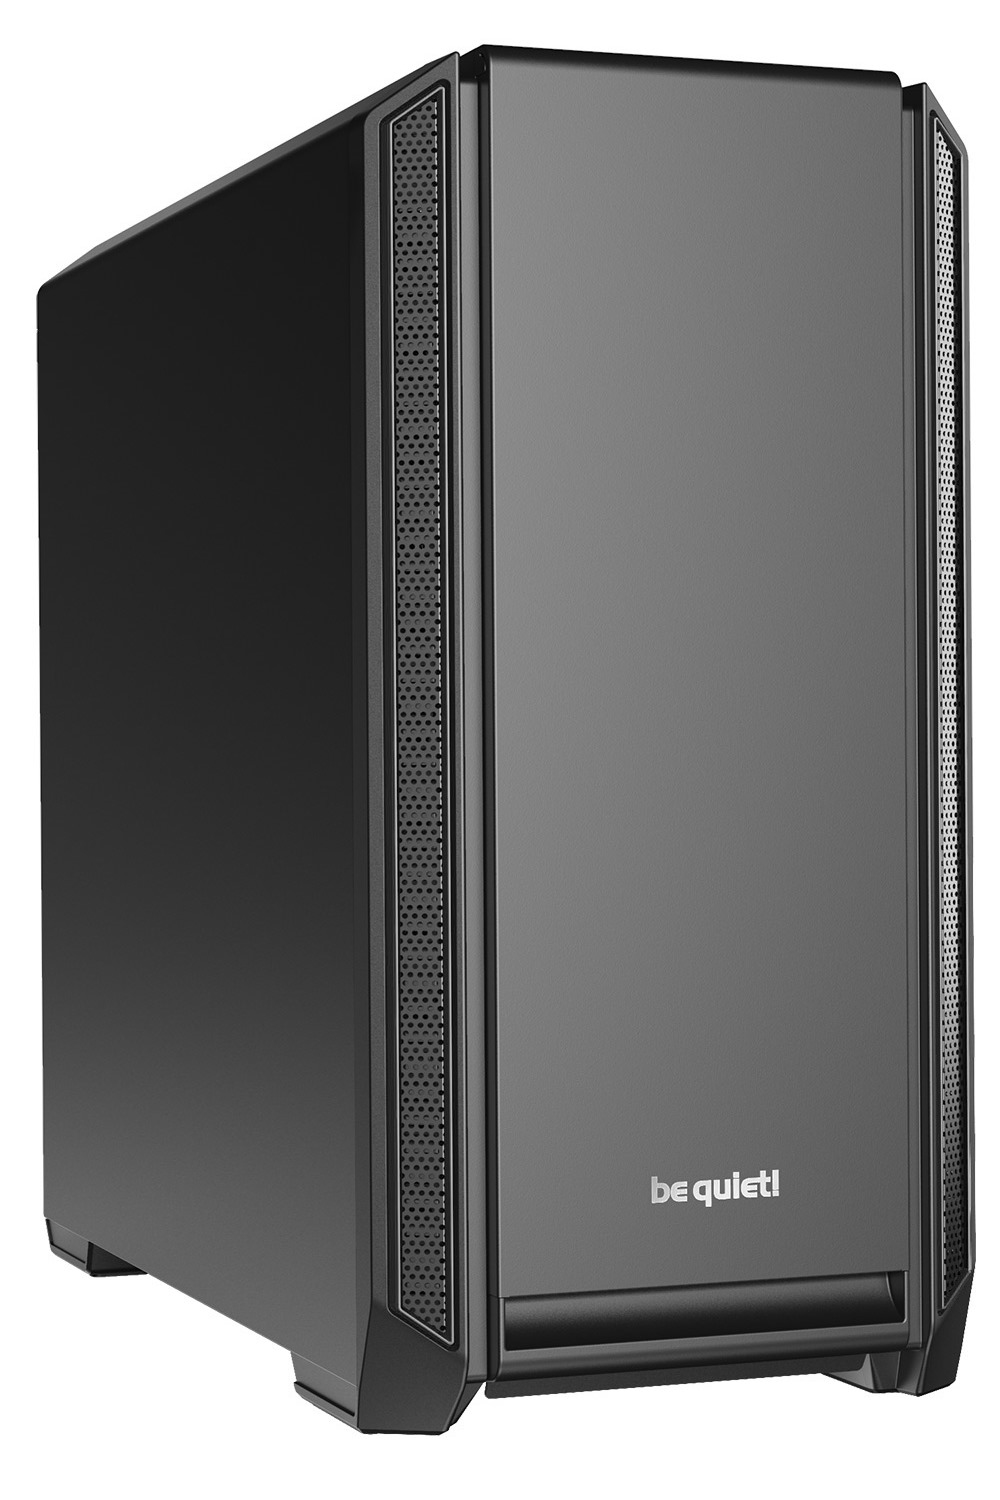 be quiet! Silent Base 601 Black, 532 x 230 x 513, IO-panel 2x USB 3.0, 1x USB 2.0, HD Audio, 3 (7) x 3,5, 6 (14) x 2,5, inc 2x 140 mm Pure Wings 2, dual air channel cooling, 3-in-1 airintake sidepanel